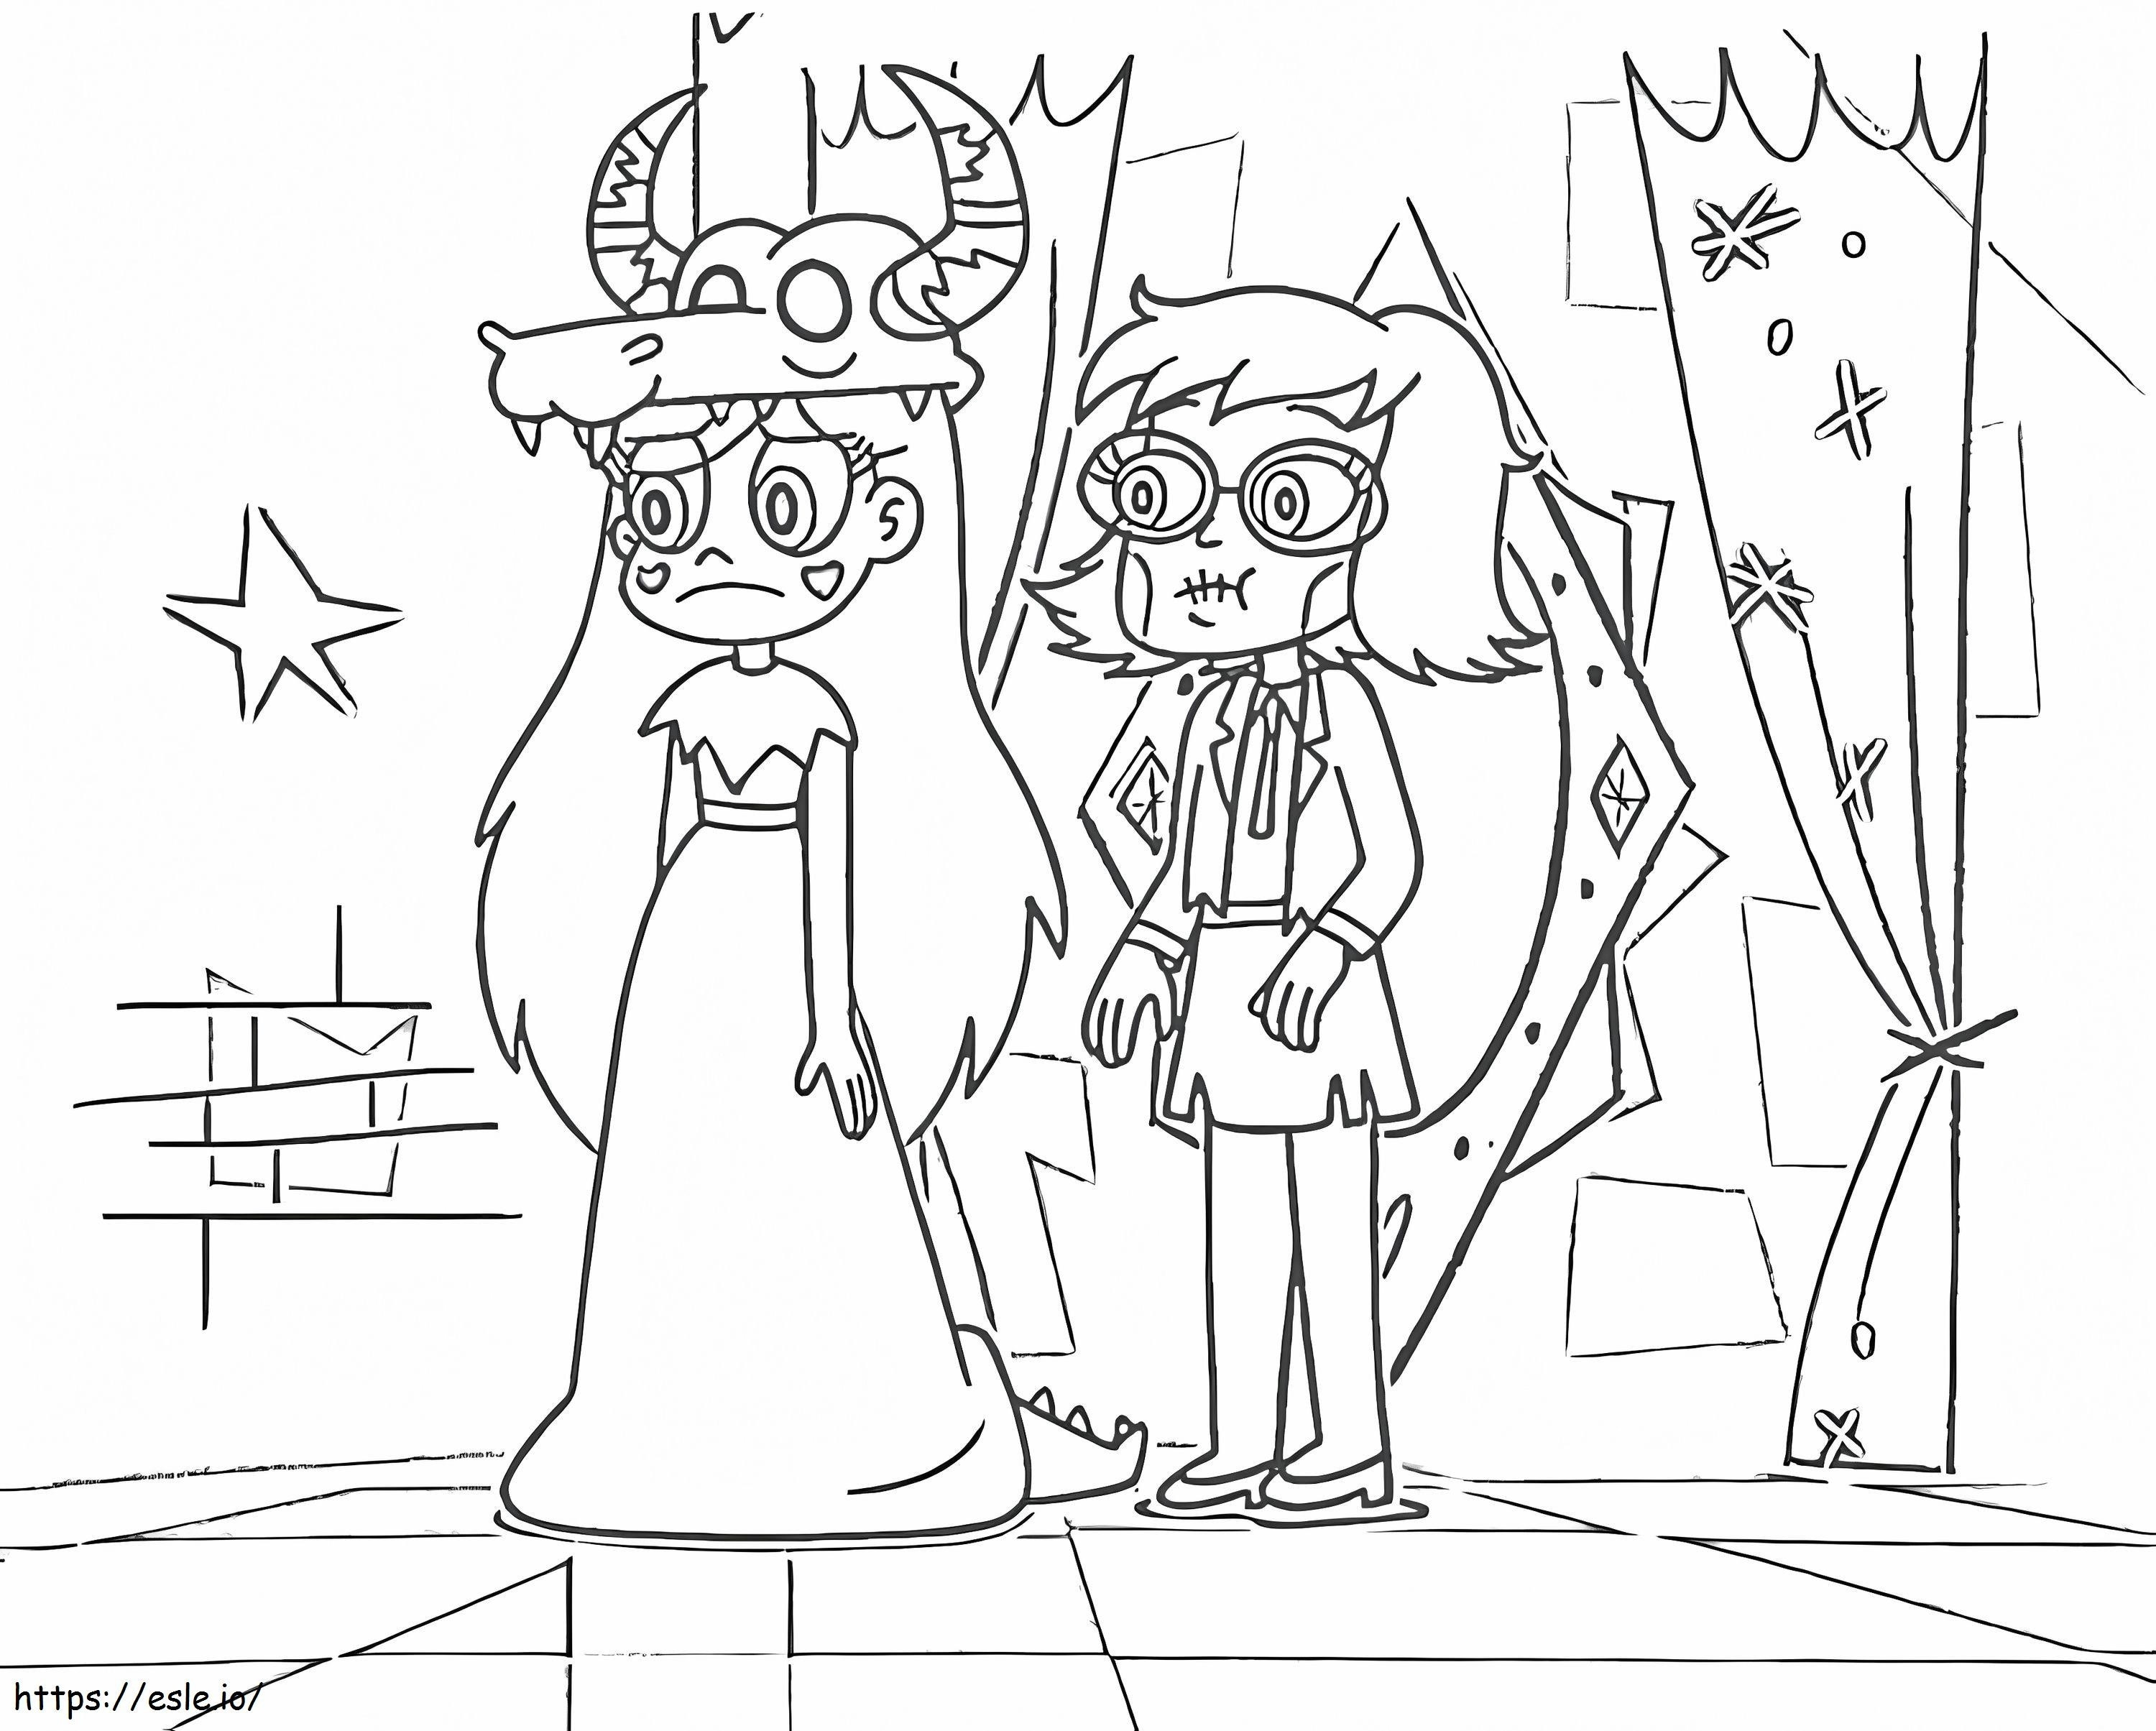 Star Vs. The Forces Of Evil 13 coloring page